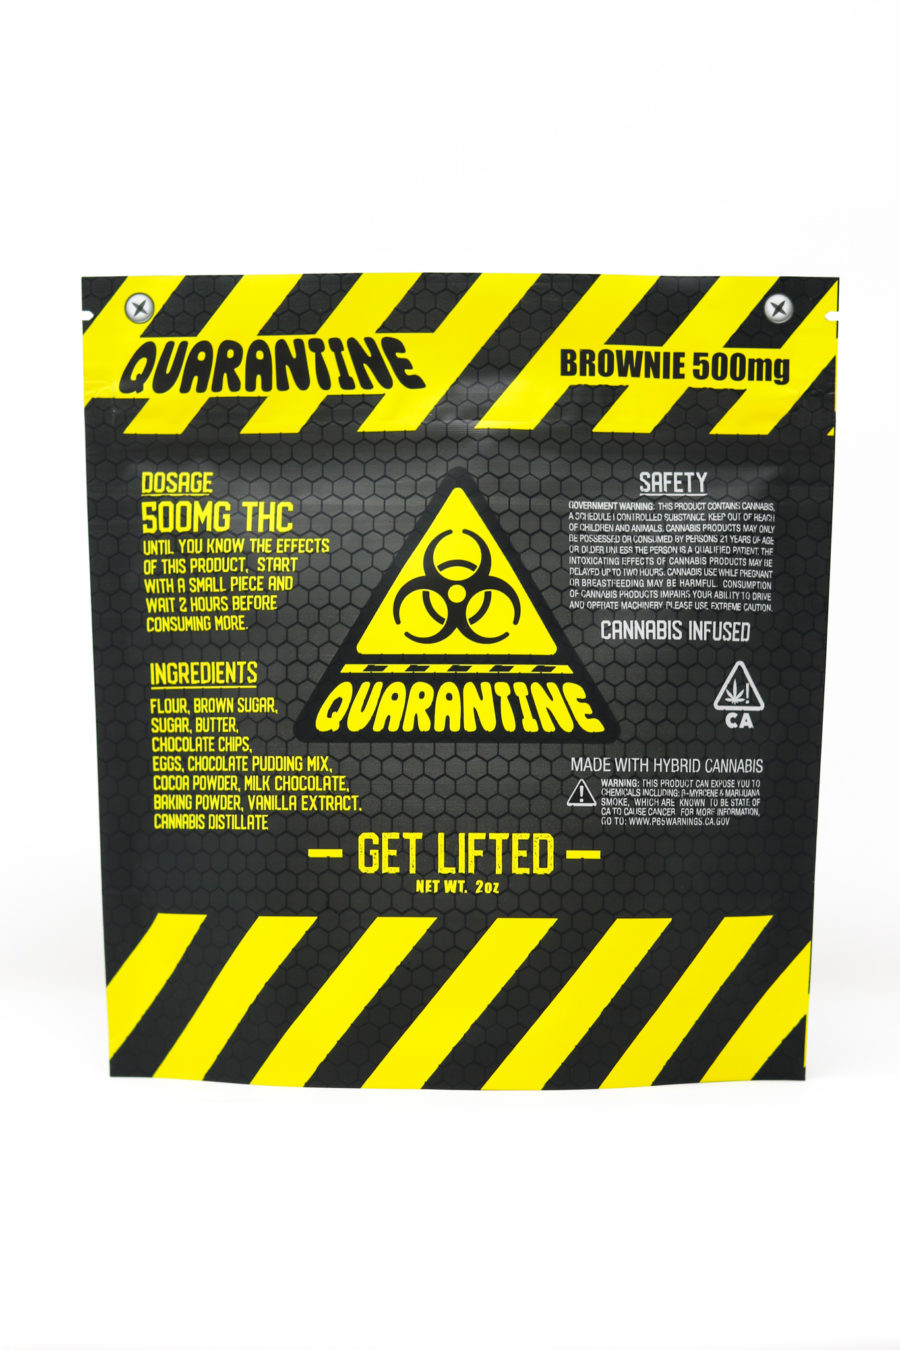 Quarantine 500mg Brownie edibles delivery in los angeles